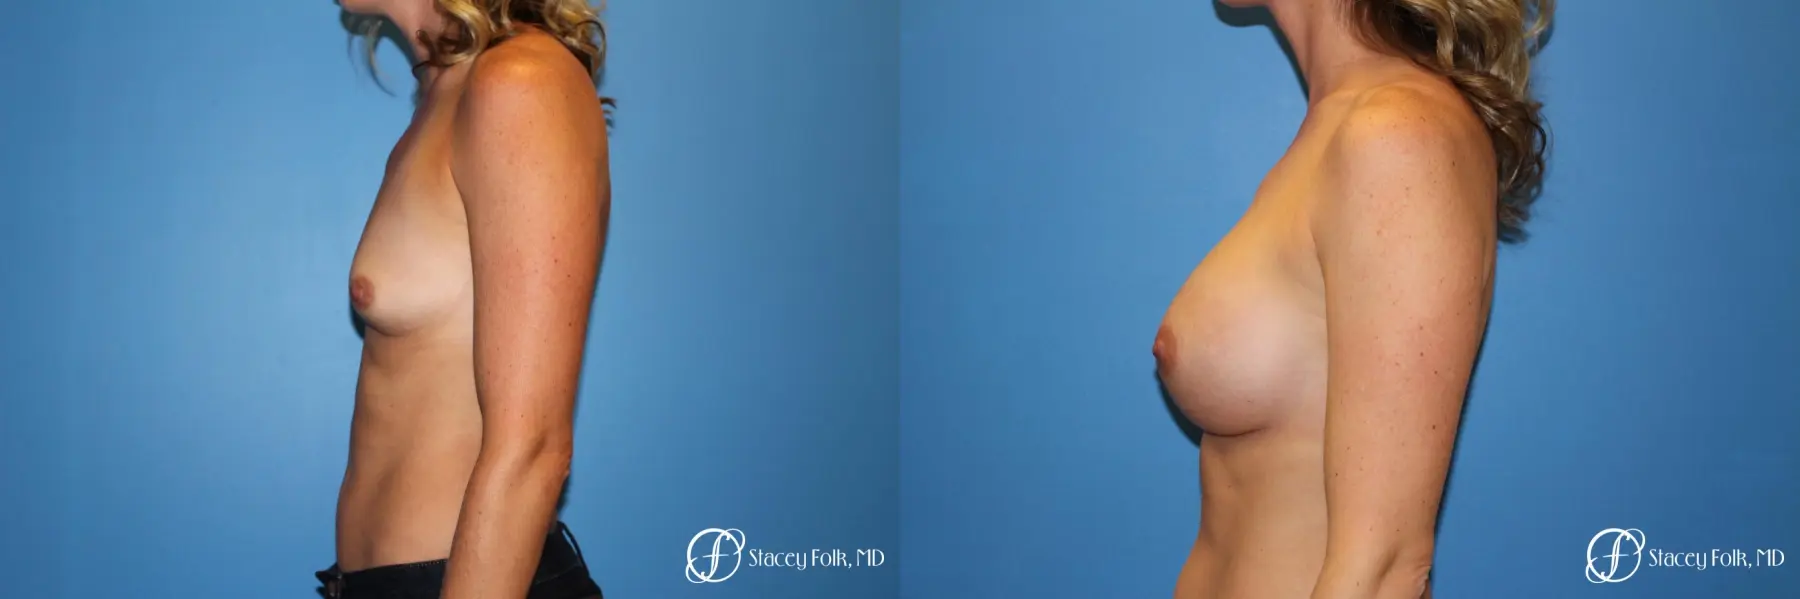 Denver Breast augmentation 4740 - Before and After 5